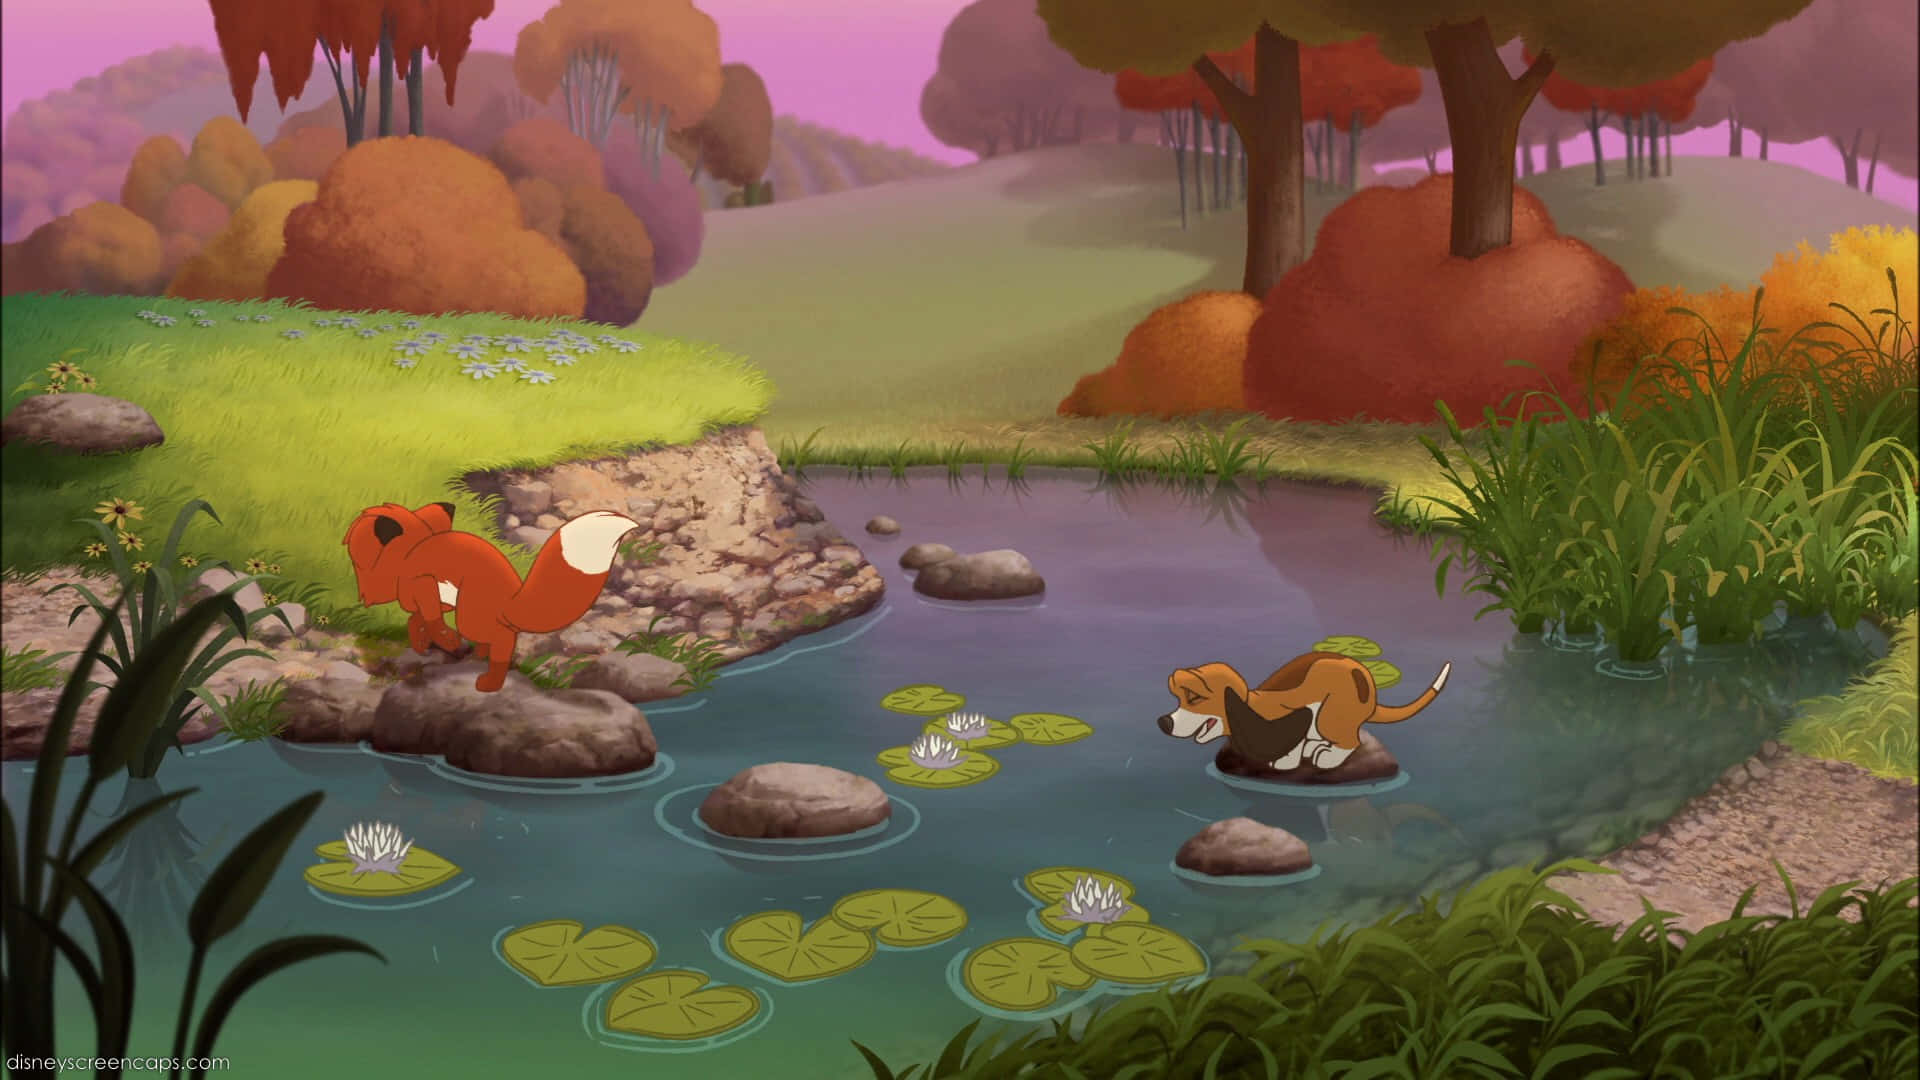 Unforgettable Friendship - The Fox and The Hound Wallpaper